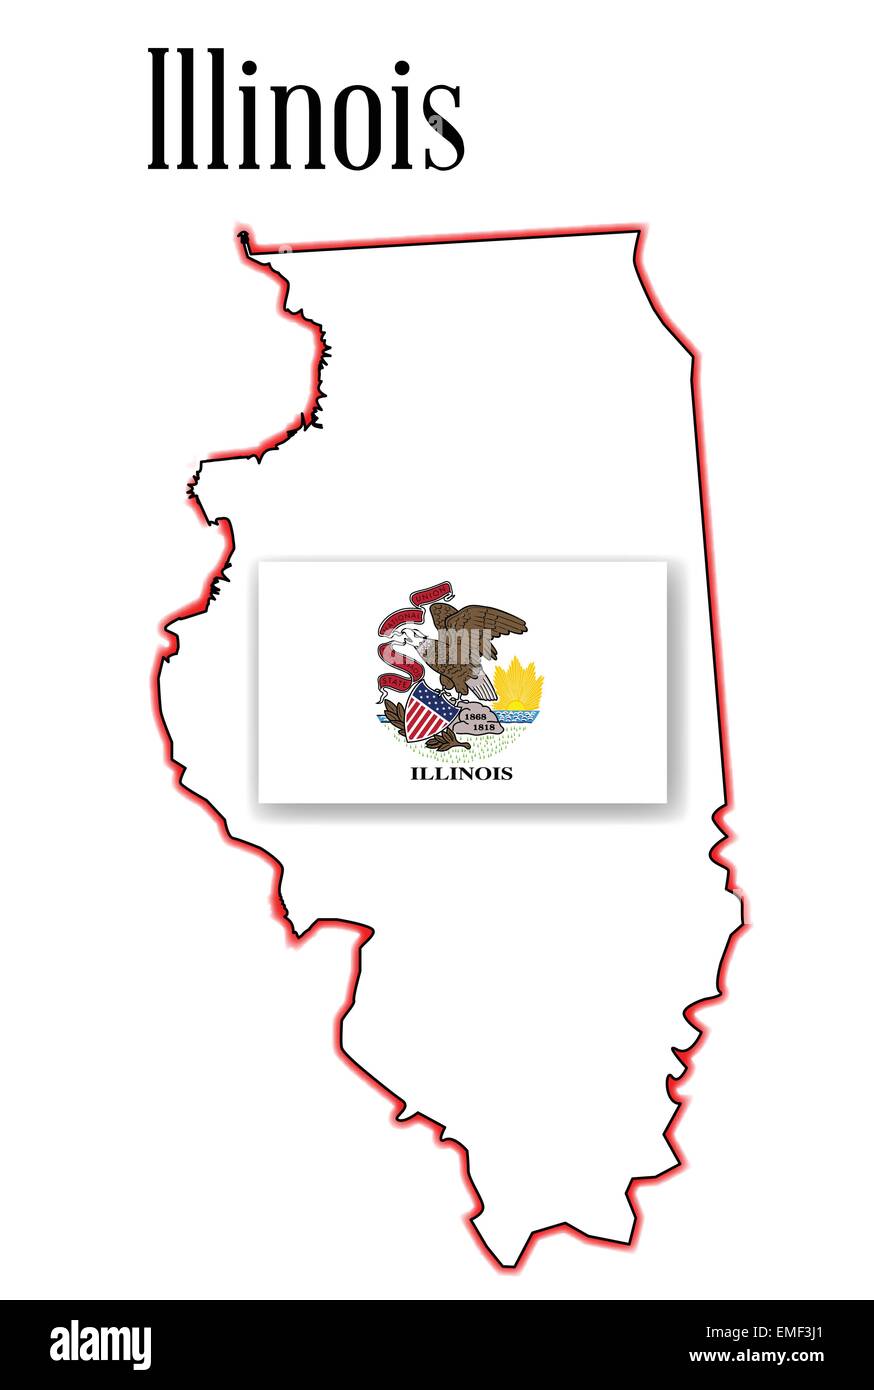 Illinois State Map and Flag Stock Vector